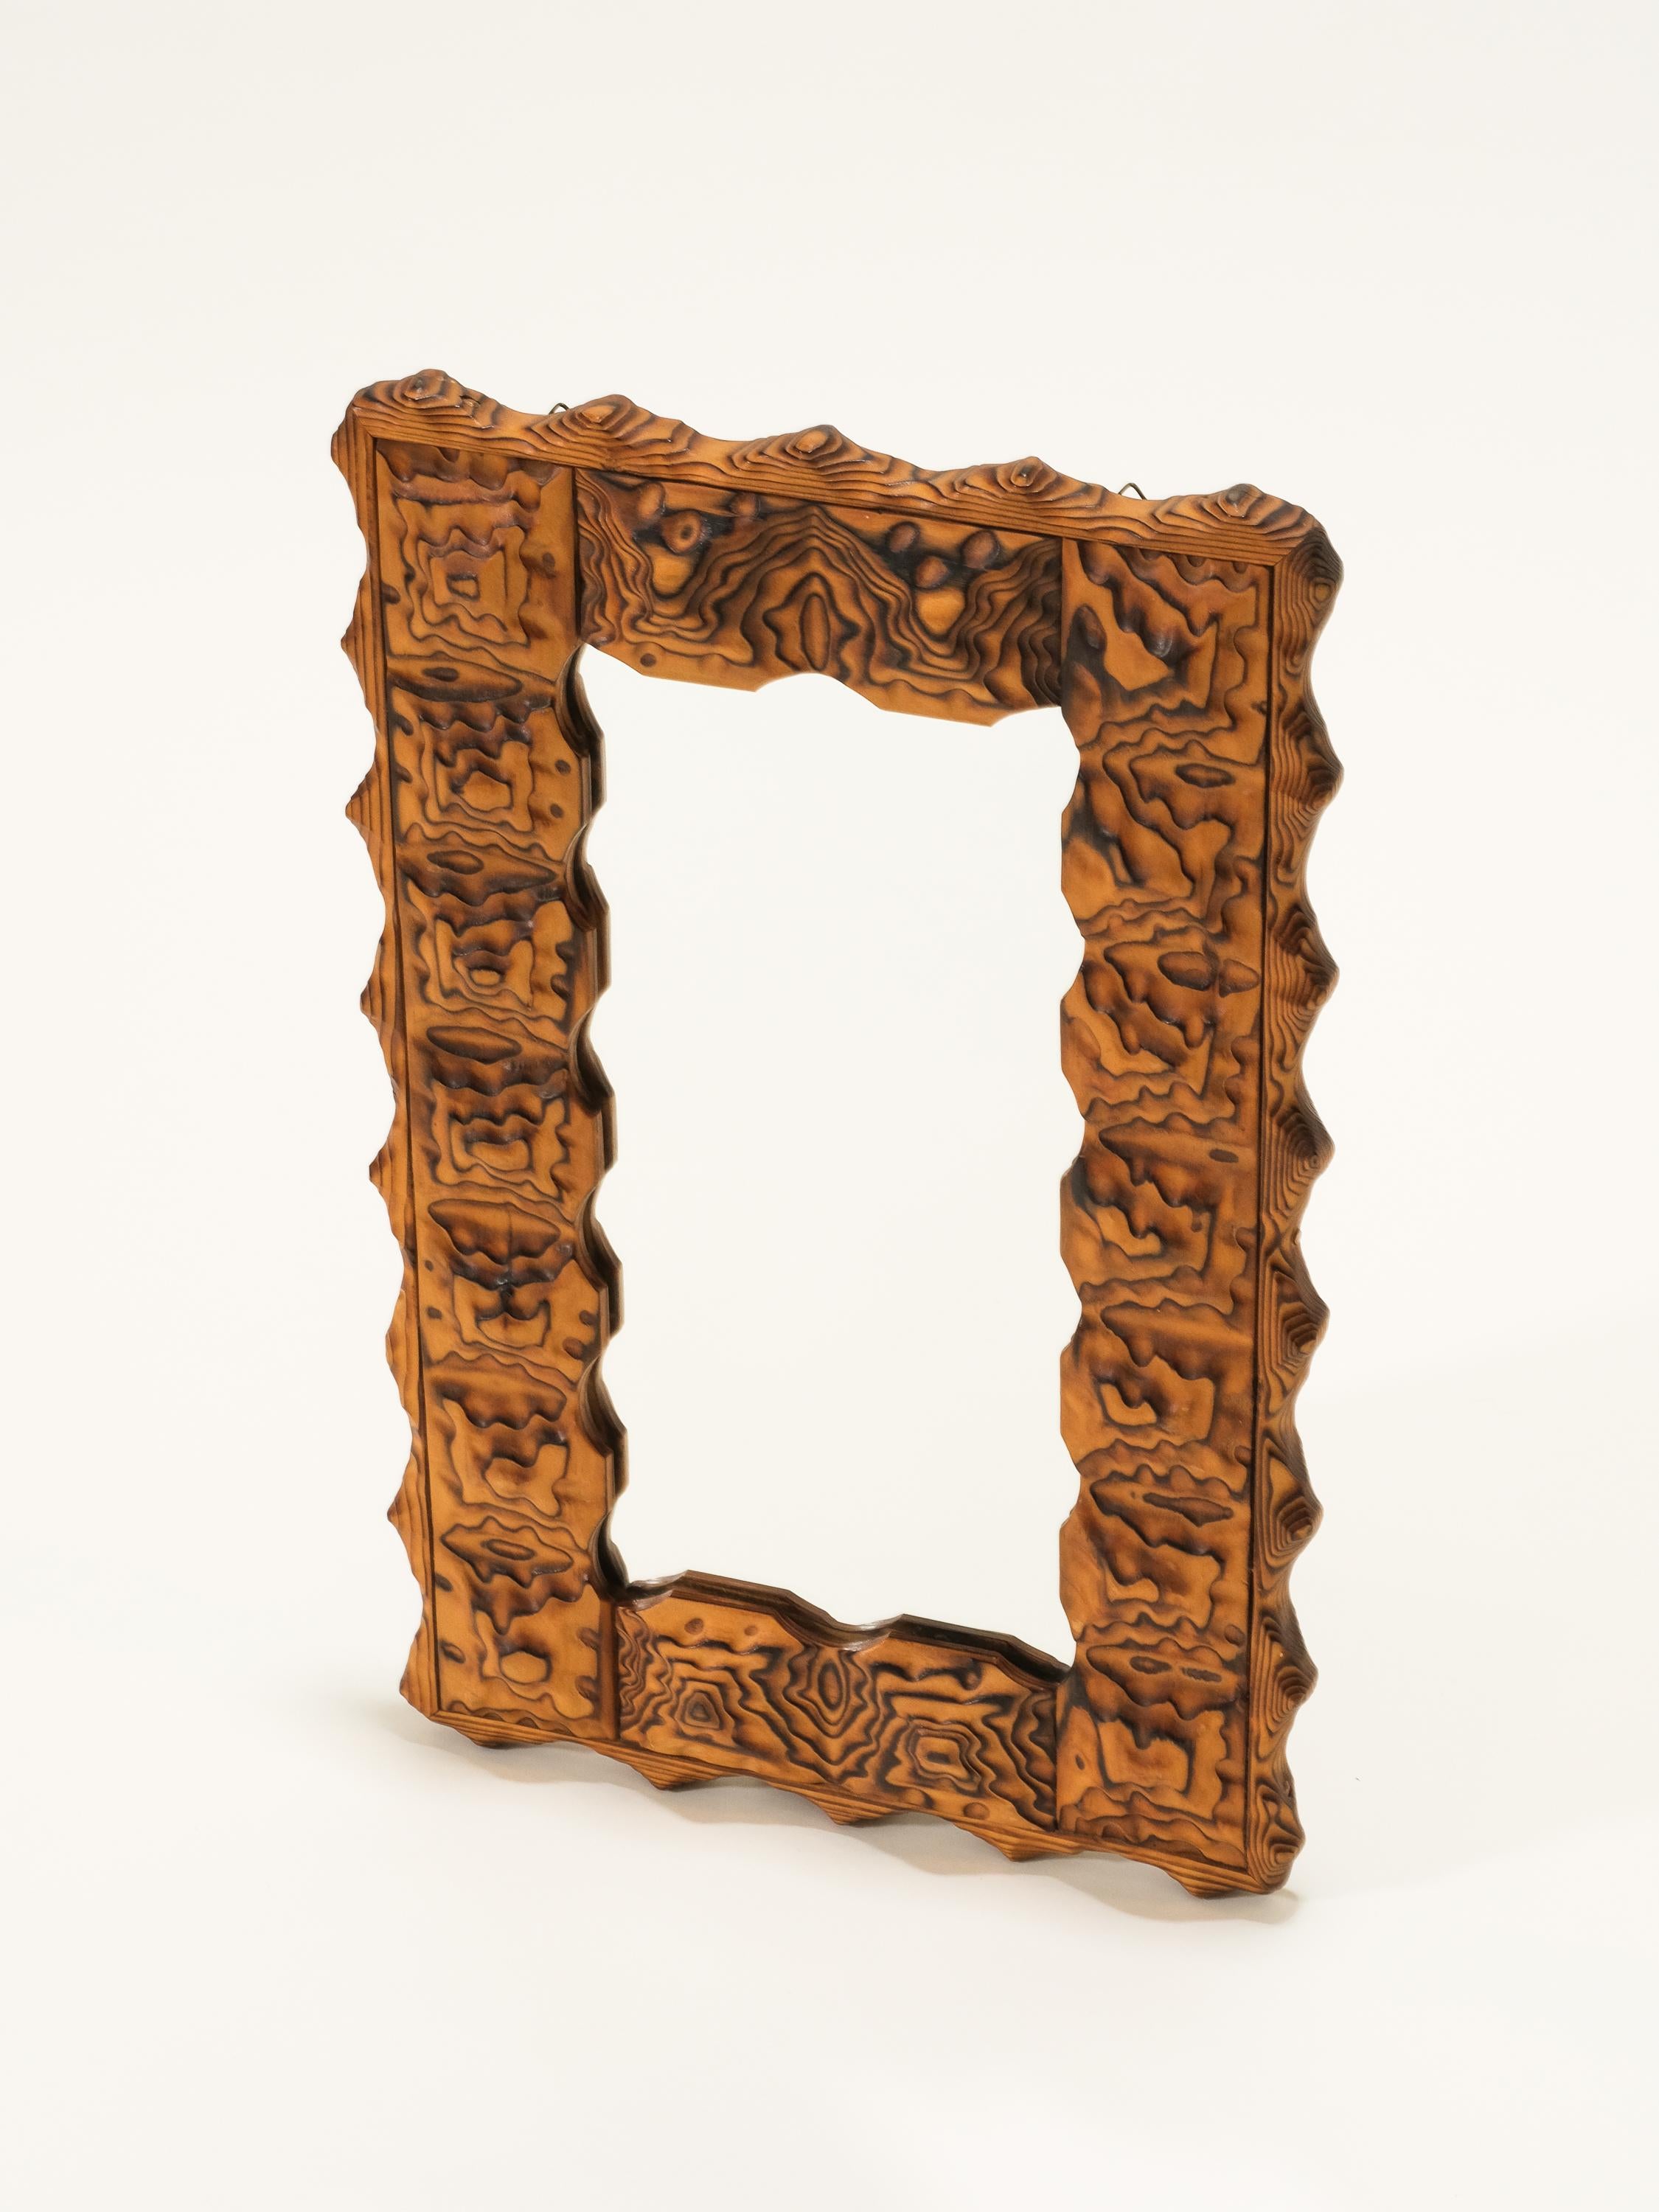 A unique charred wooden wall mirror produced in Finland, 1970s. Burnmarked by the maker.